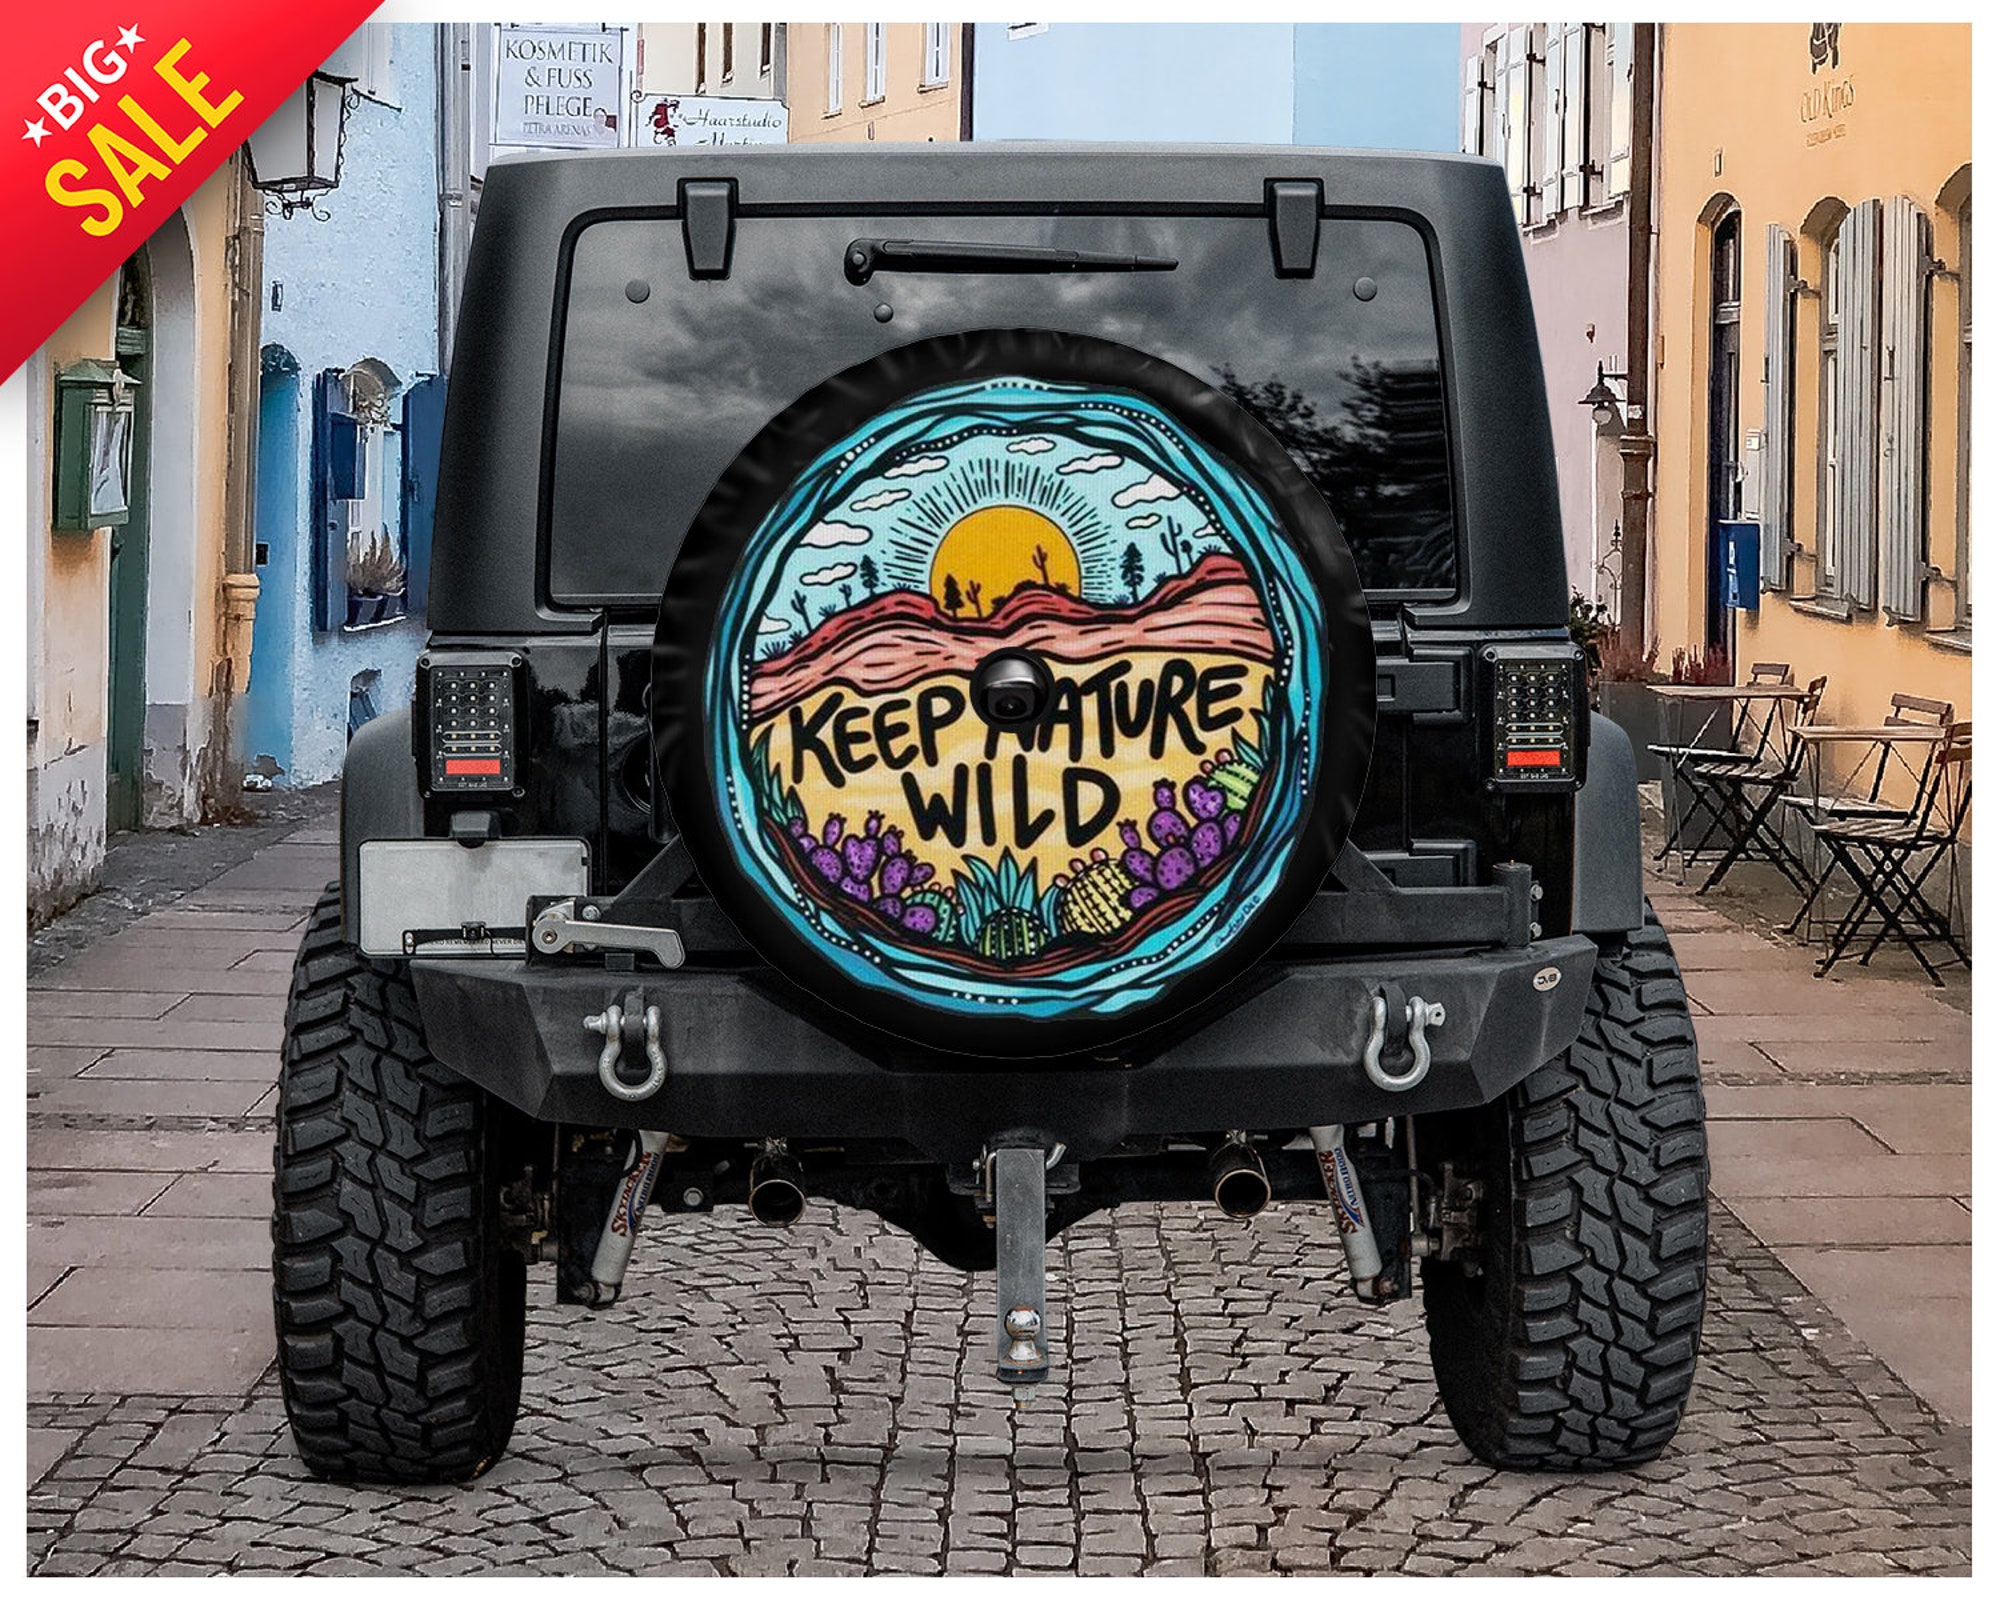 Keep Natural Wild Spare Tire Covers, birthday gift Personalized Gifts, Car Accessories, Spare Tire Cover